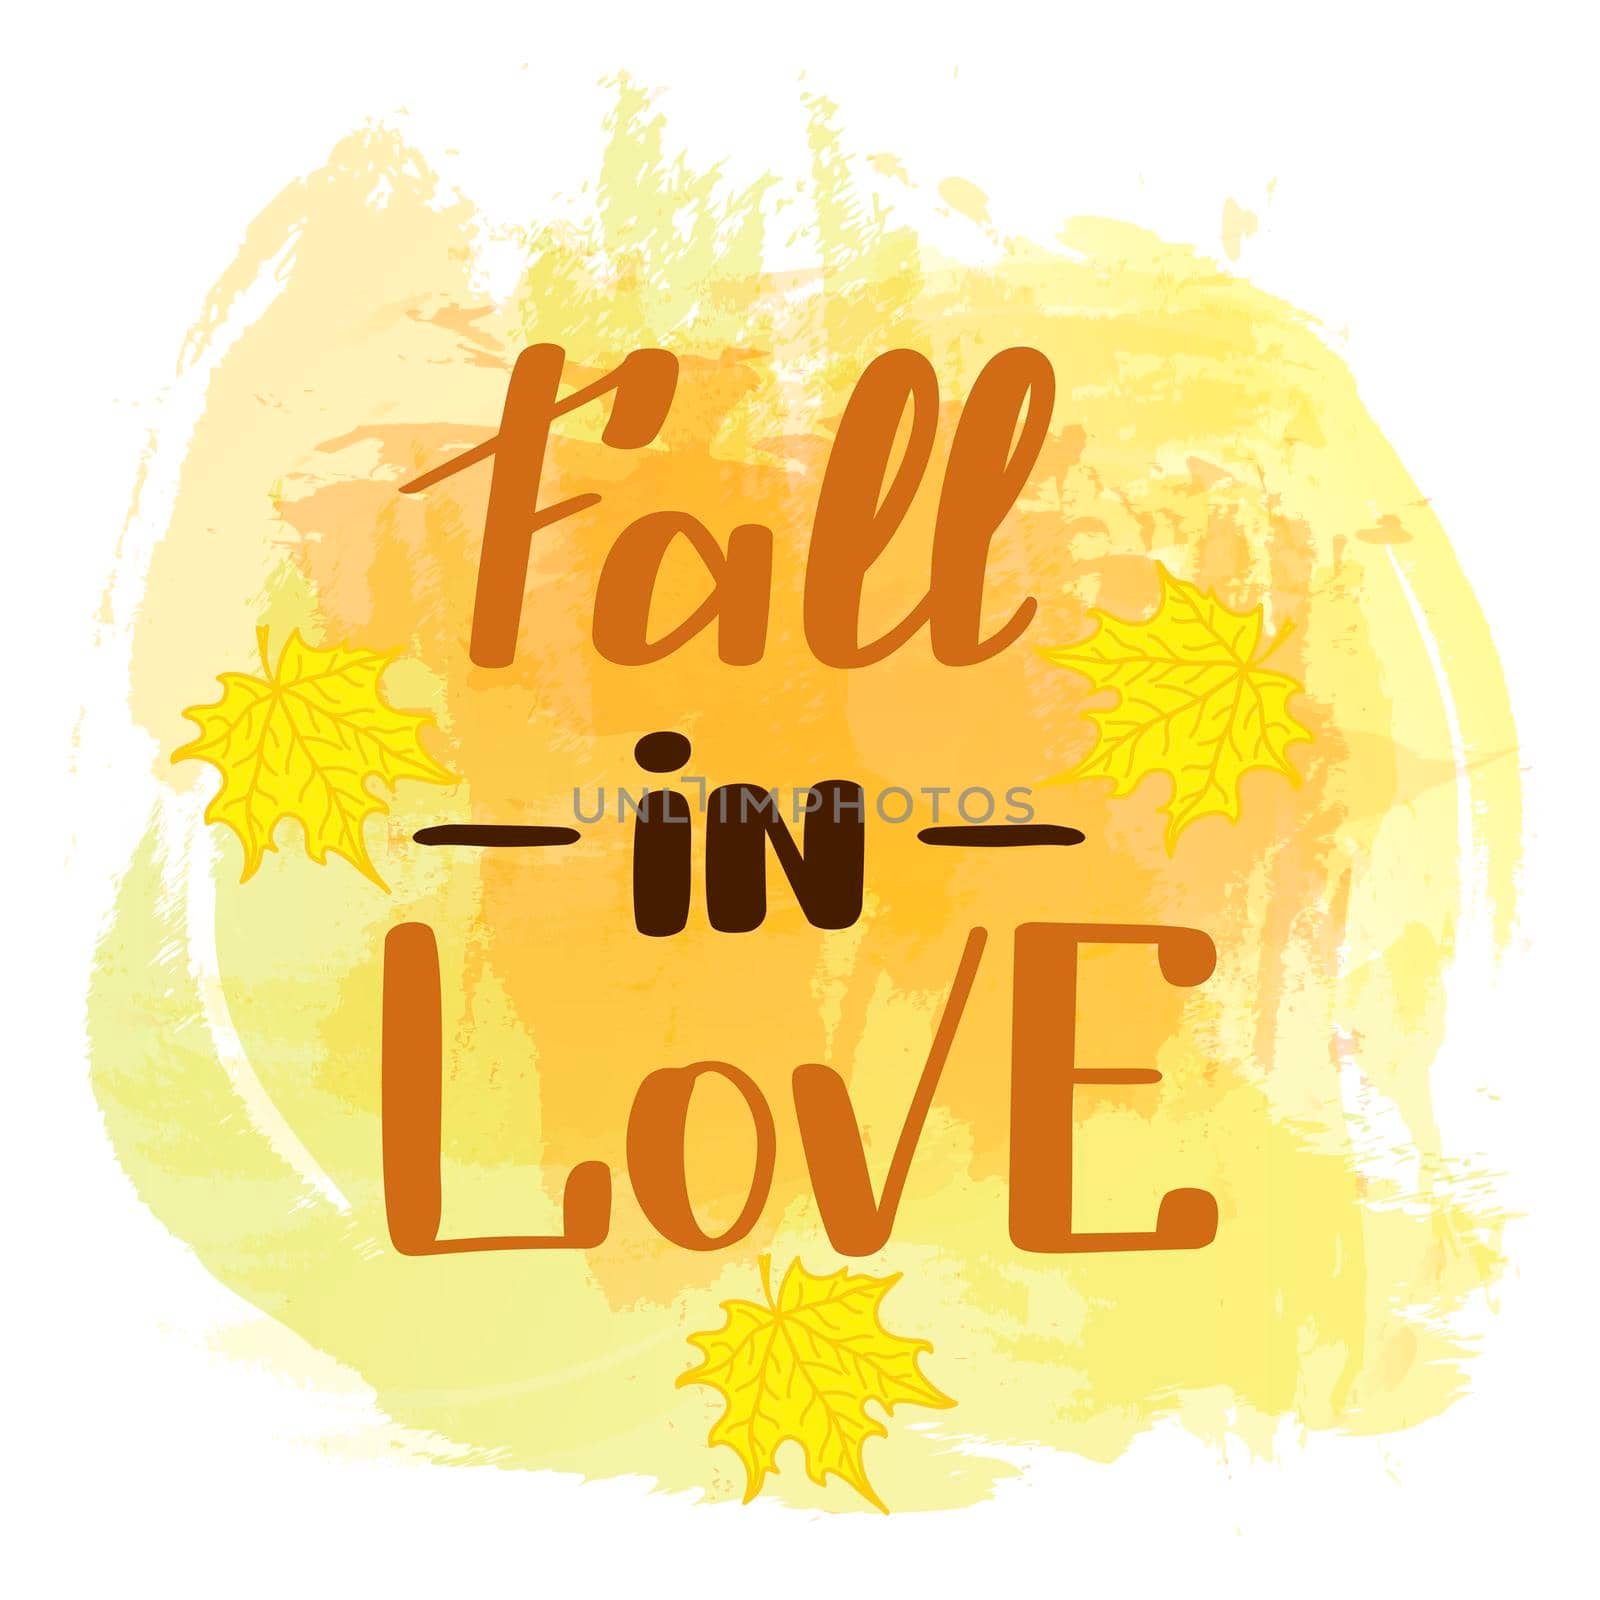 Fall in love. Handwritten lettering on watercolor background. illustration for posters, cards and much more by Marin4ik